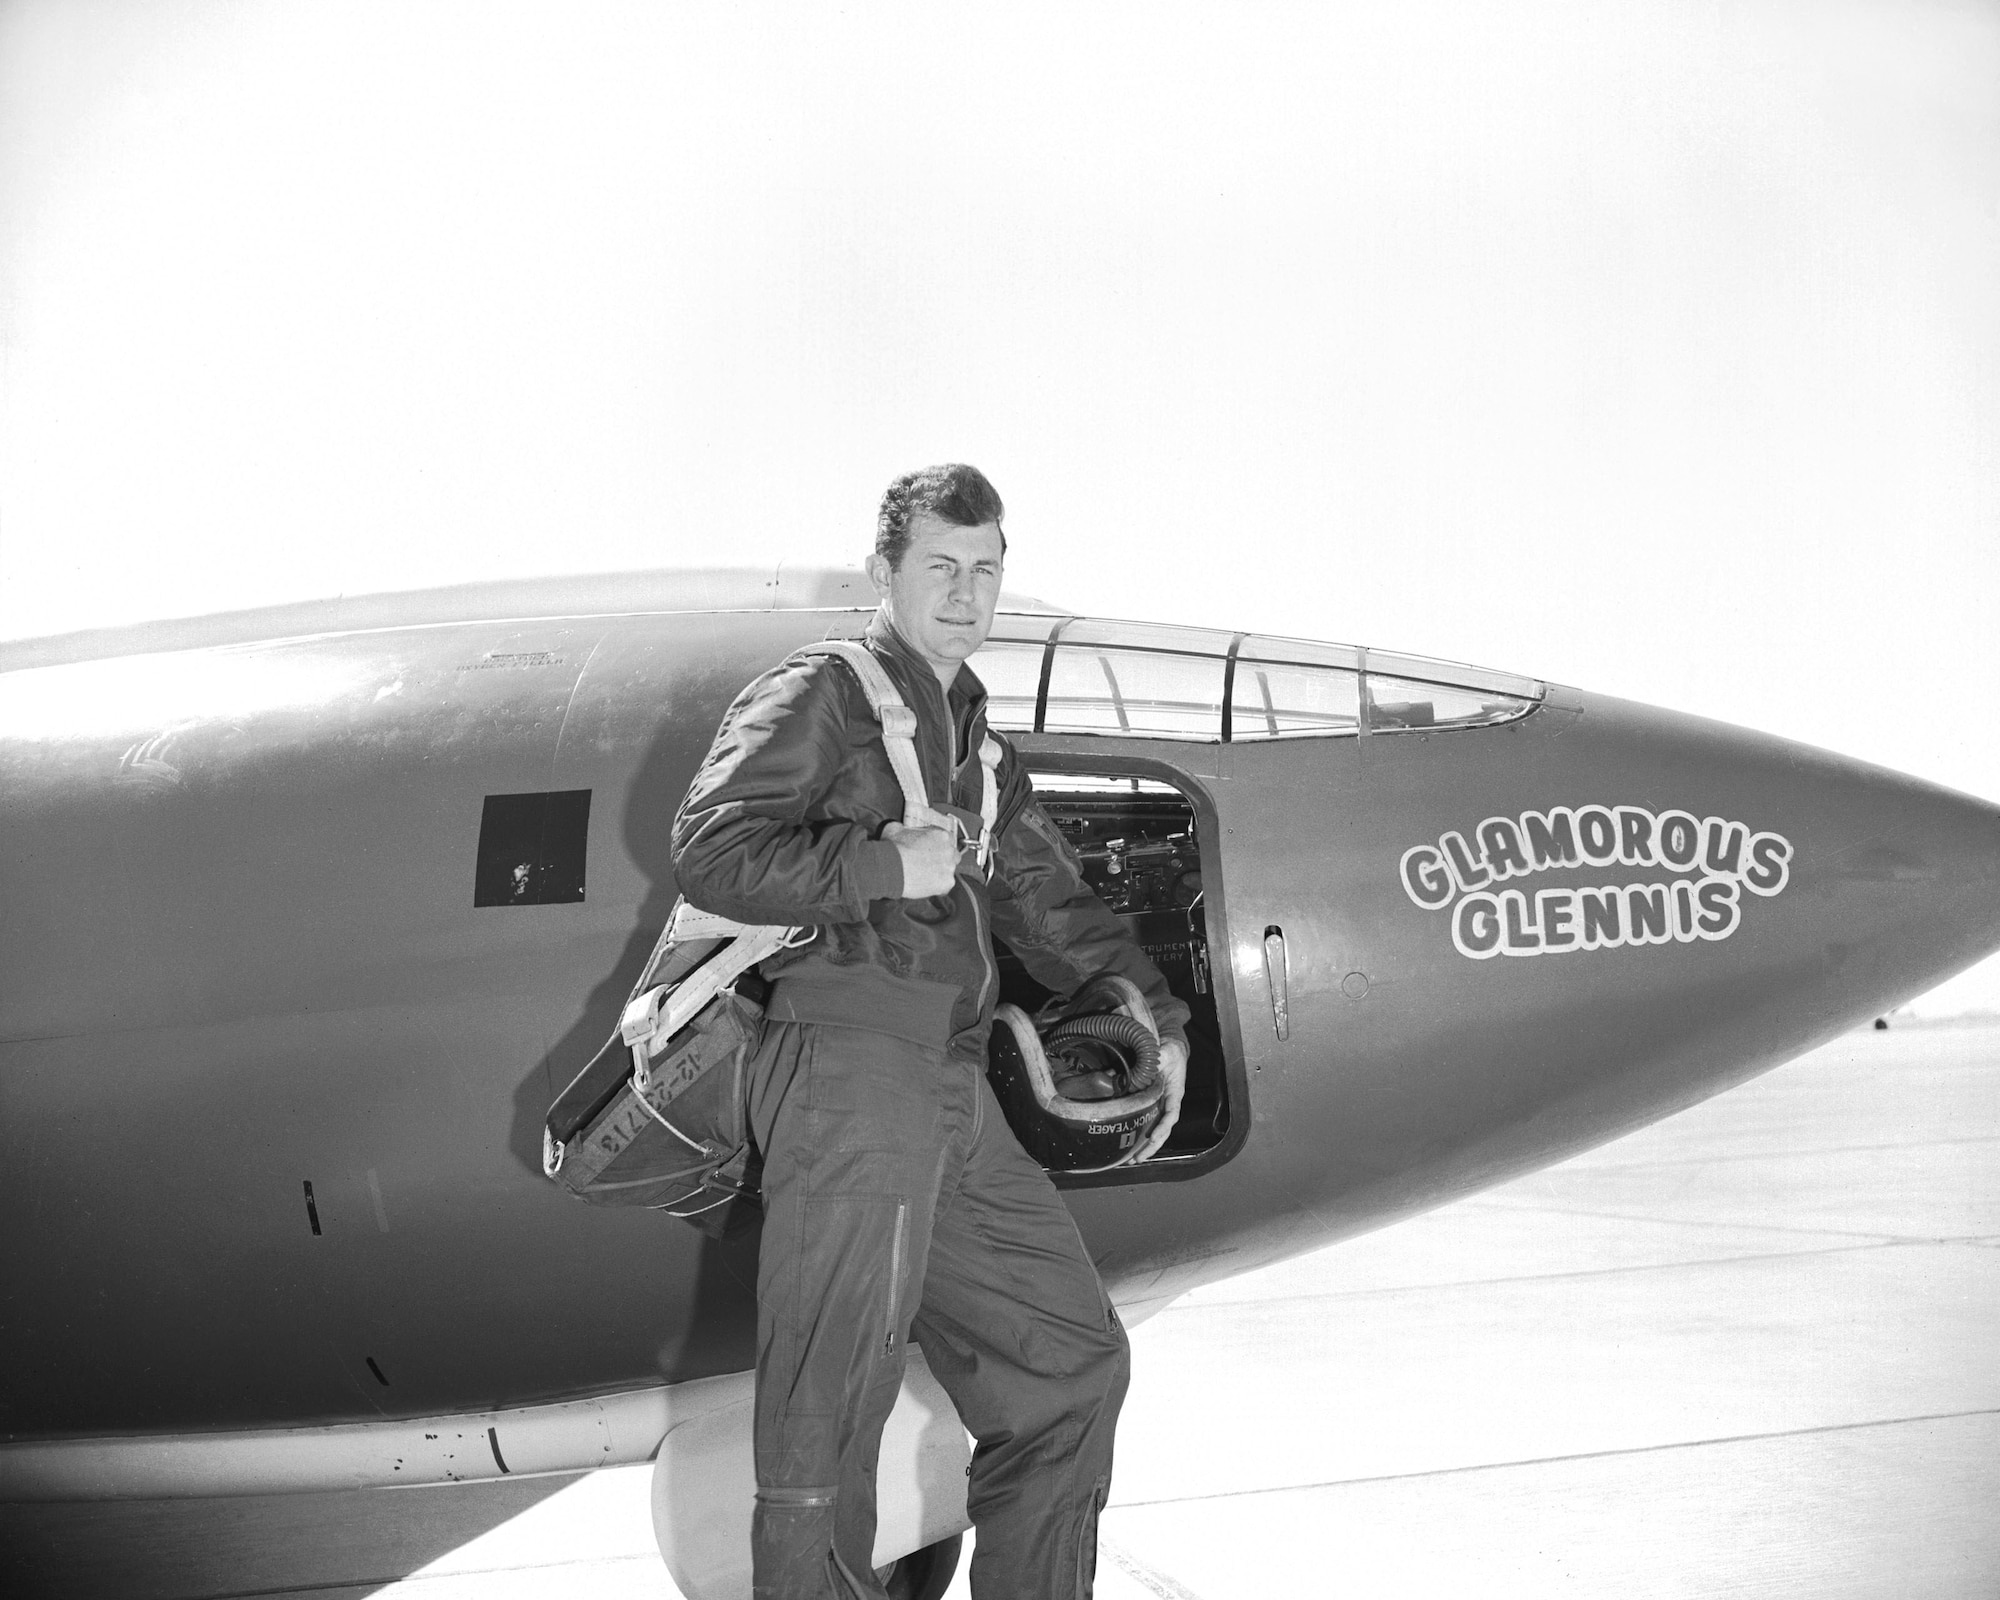 Air Force Captain Charles E. “Chuck” Yeager and the rocket-powered Bell X 1, which he dubbed the “Glamorous Glennis.” On October 14, 1947, Captain Yeager piloted the X-1 to Mach 1.06 (approximately 700 mph at 42,000 feet), becoming the first man to break the so-called "sound barrier."  (U.S. Air Force Photo courtesy AFFTC History Office) 